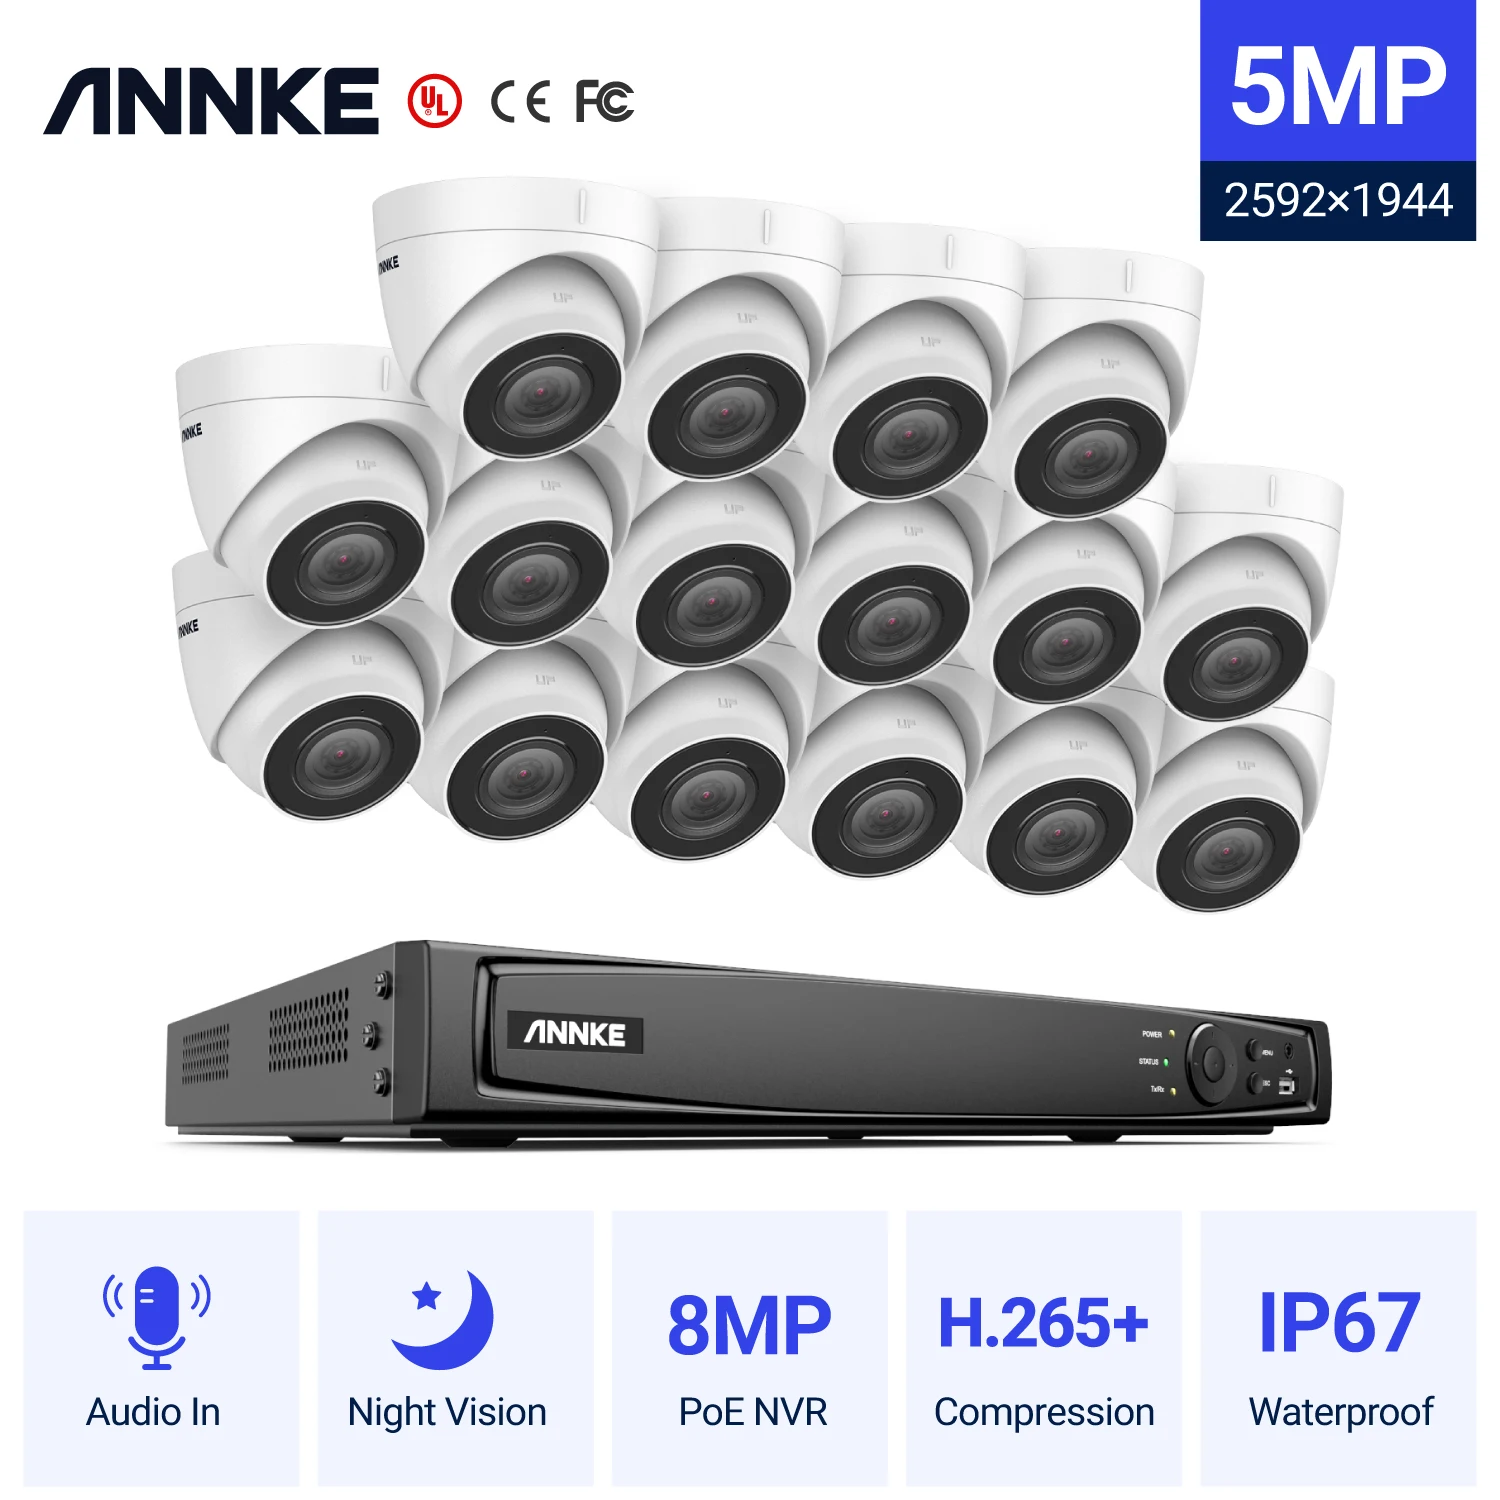 

ANNKE 5MP FHD POE Video Surveillance System 16CH H.265+ 4K NVR Recorder 5MP Security Cameras Audio Recording 5MP PoE Ip camera